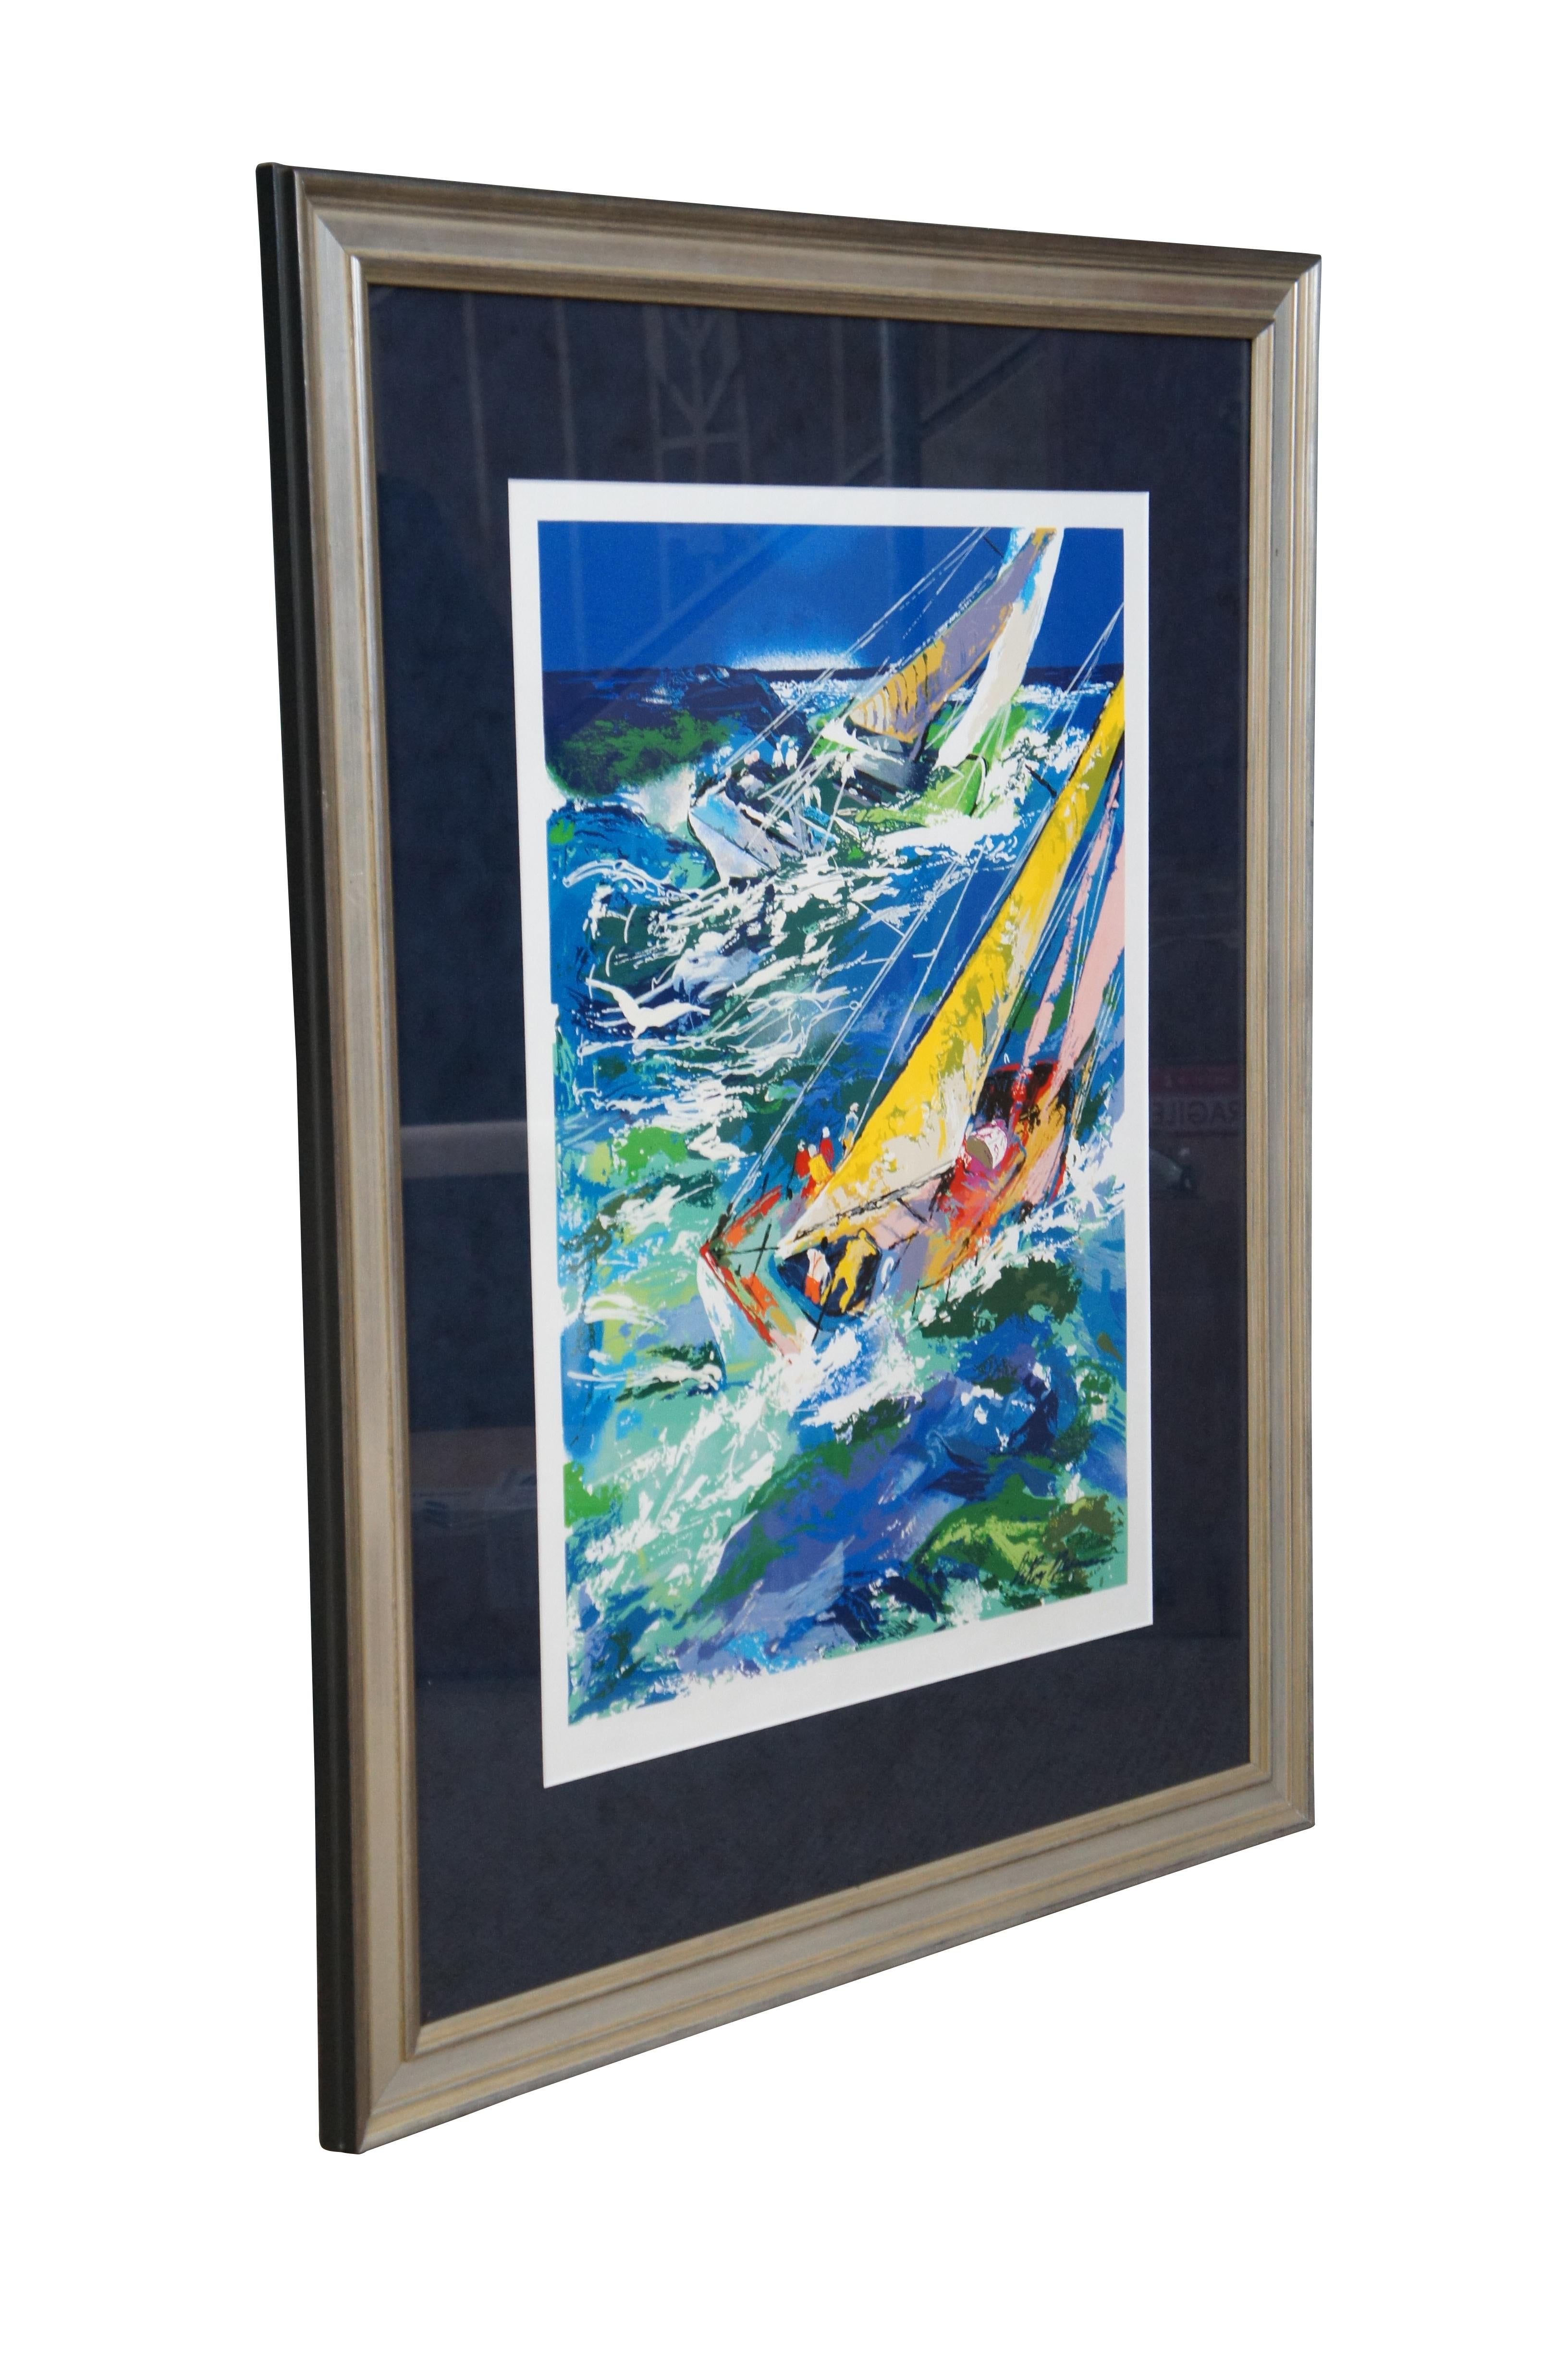 Vintage serigraph print titled High Seas Sailing II by LeRoy Neiman. Features an impressionist style nautical / martime seascape print of sailboats in the ocean. Signed in stone lower right.

Provenance:
Estate of J. Frederic Gagel, owner of